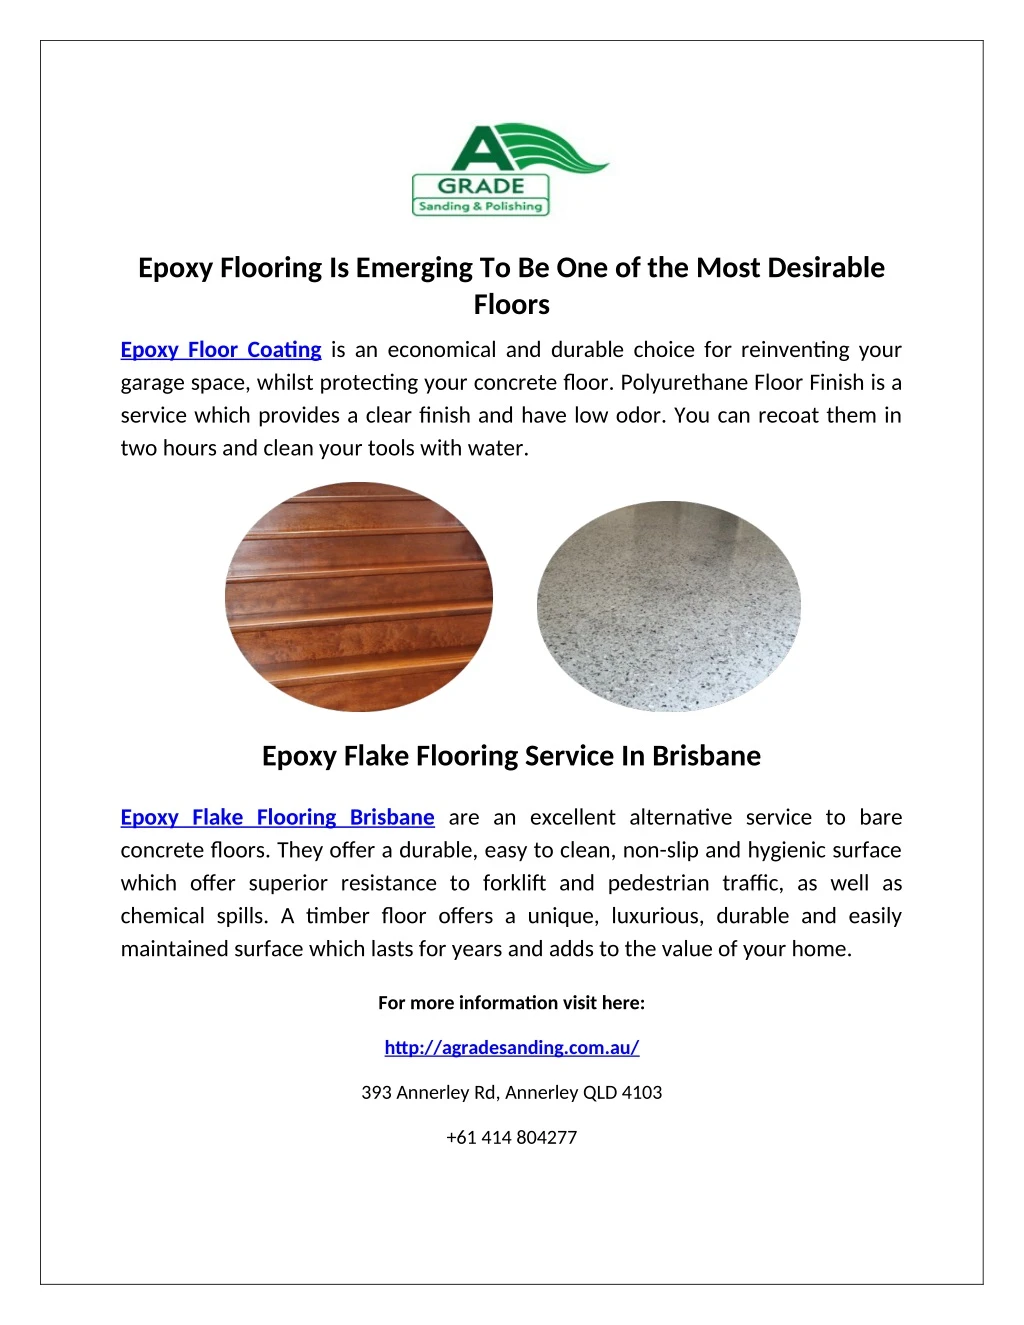 epoxy flooring is emerging to be one of the most